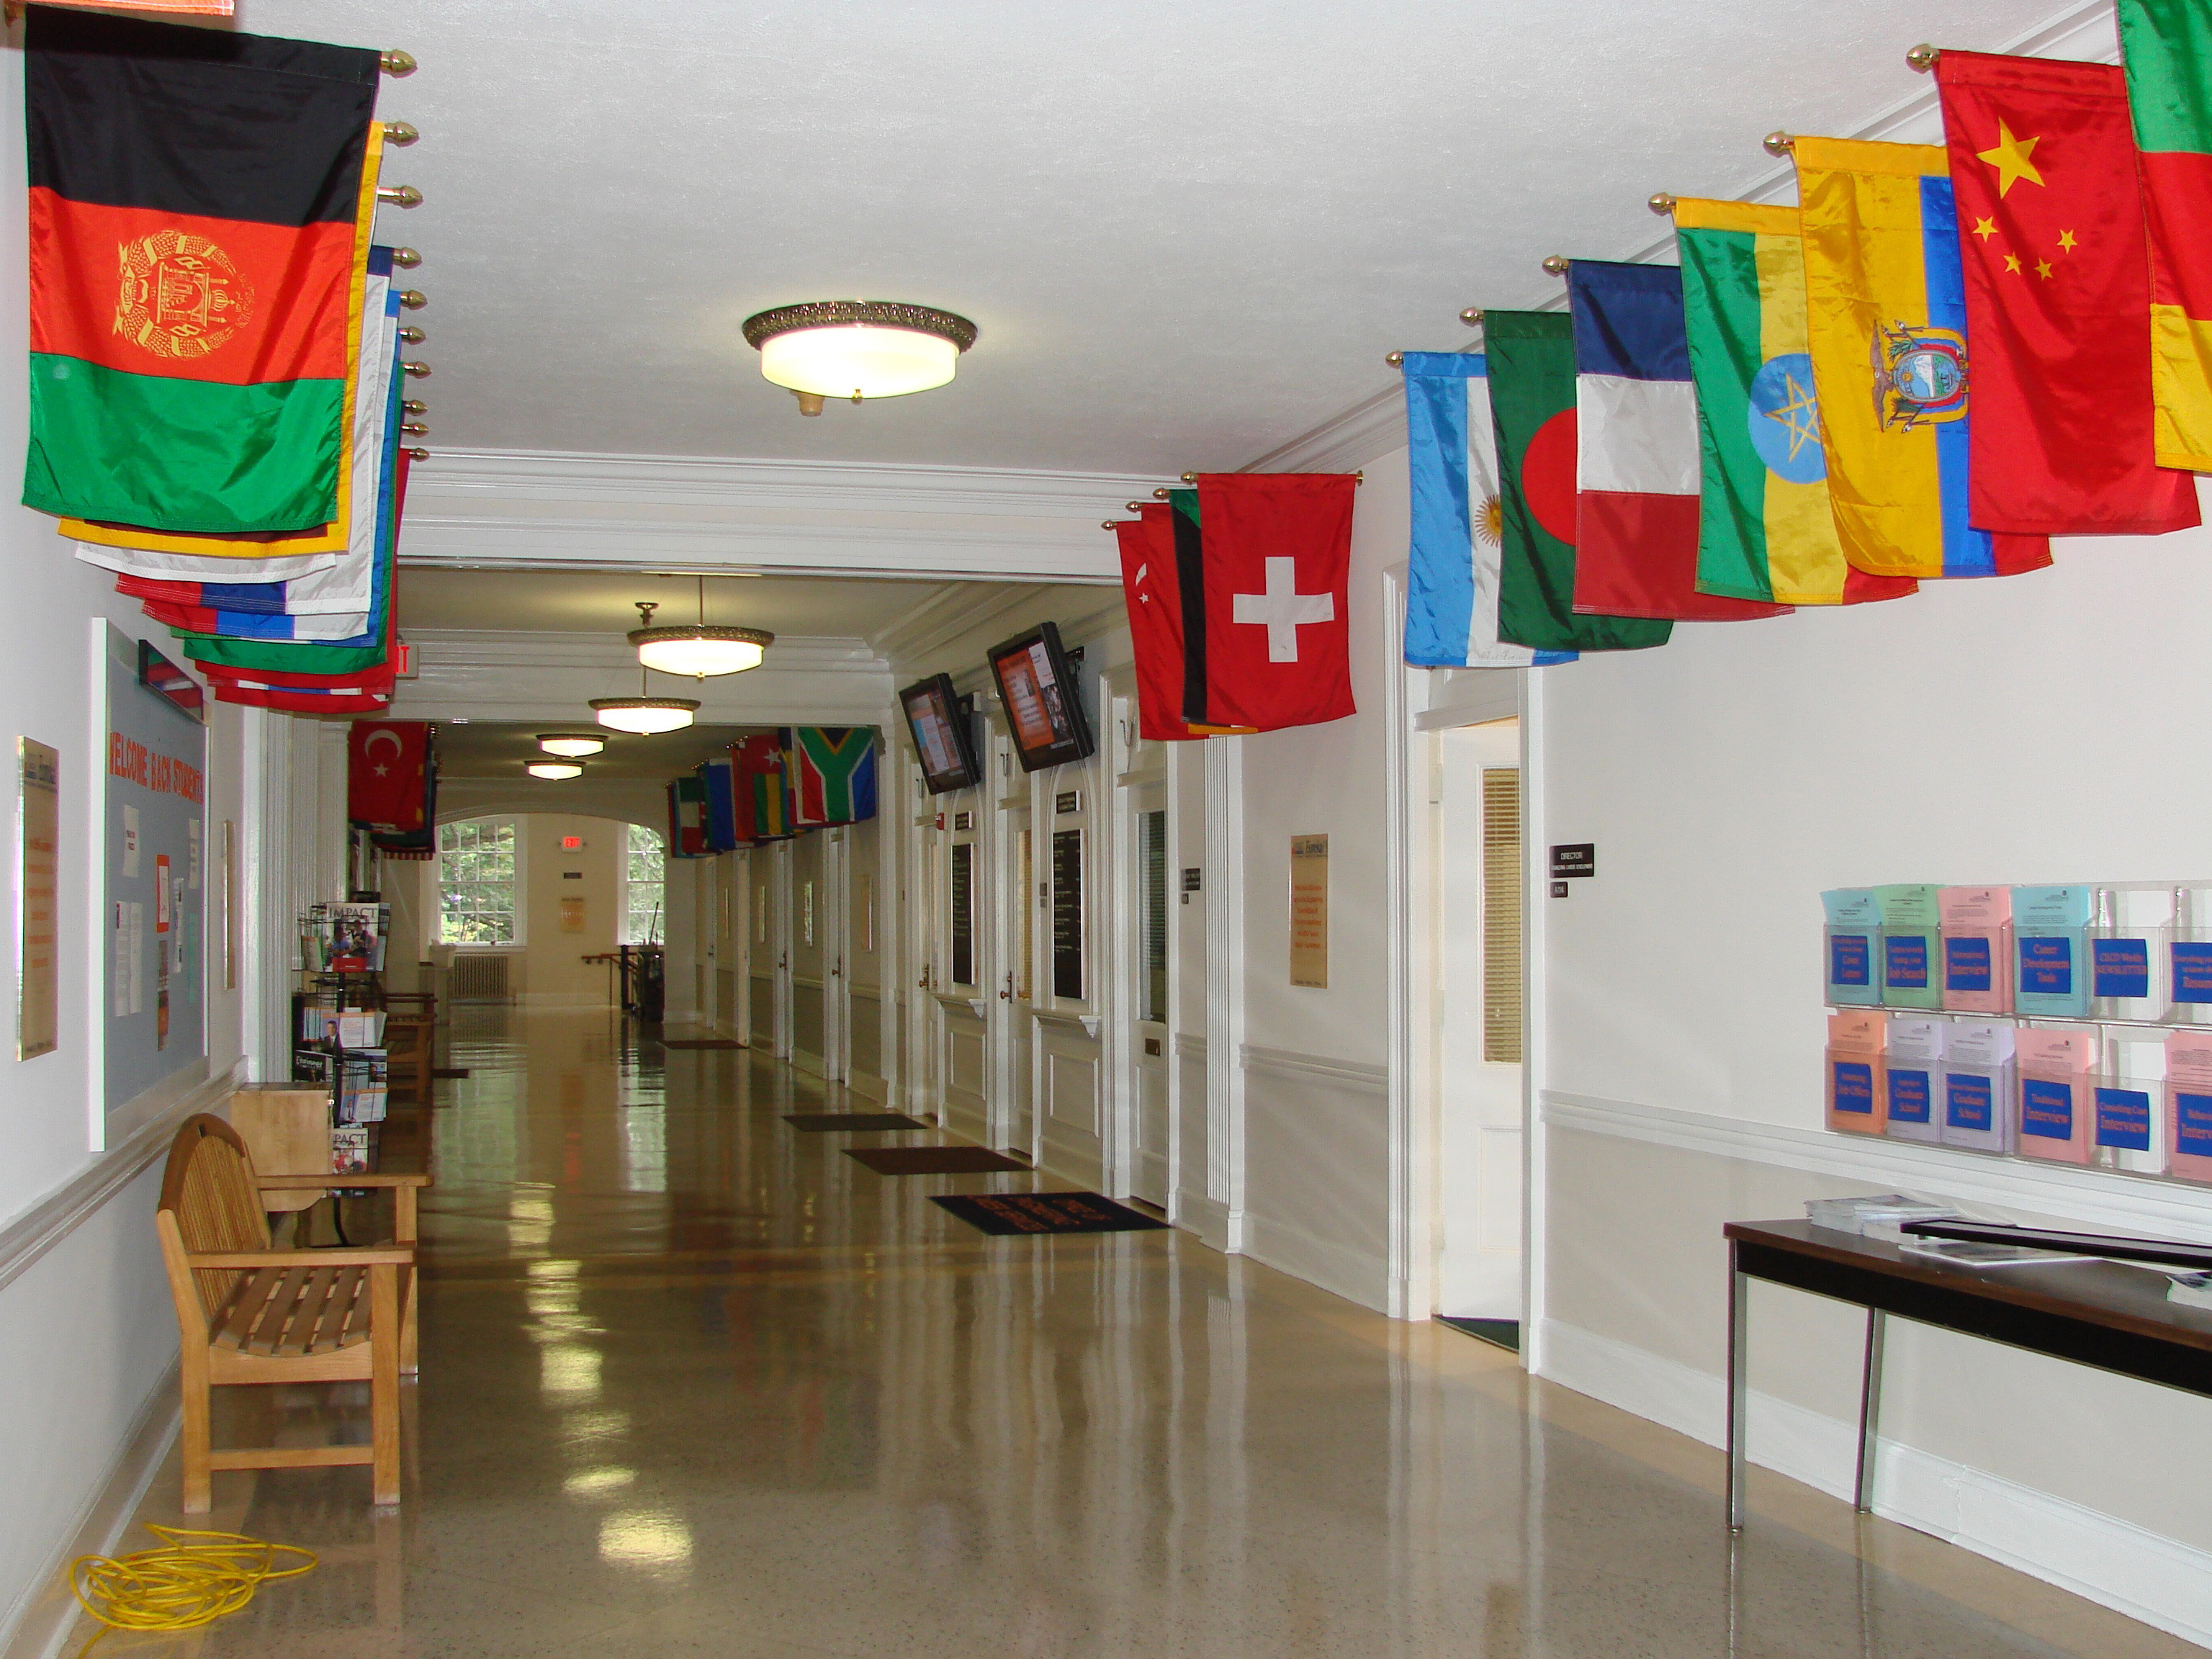 Various country Flags hanging at the top of the hallway outside of classrooms